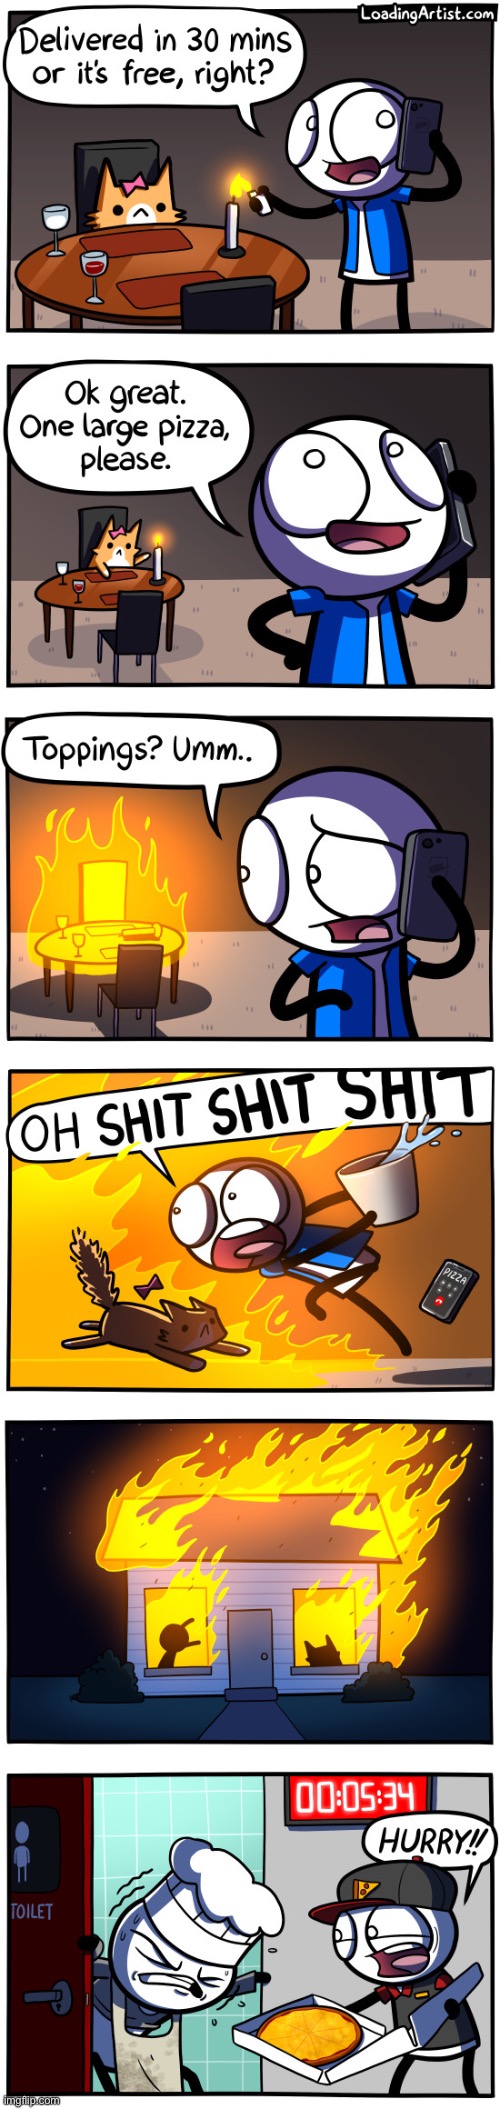 How did the cat make the table go on fire? | image tagged in memes,funny,comics,loading artist,cat,fire | made w/ Imgflip meme maker